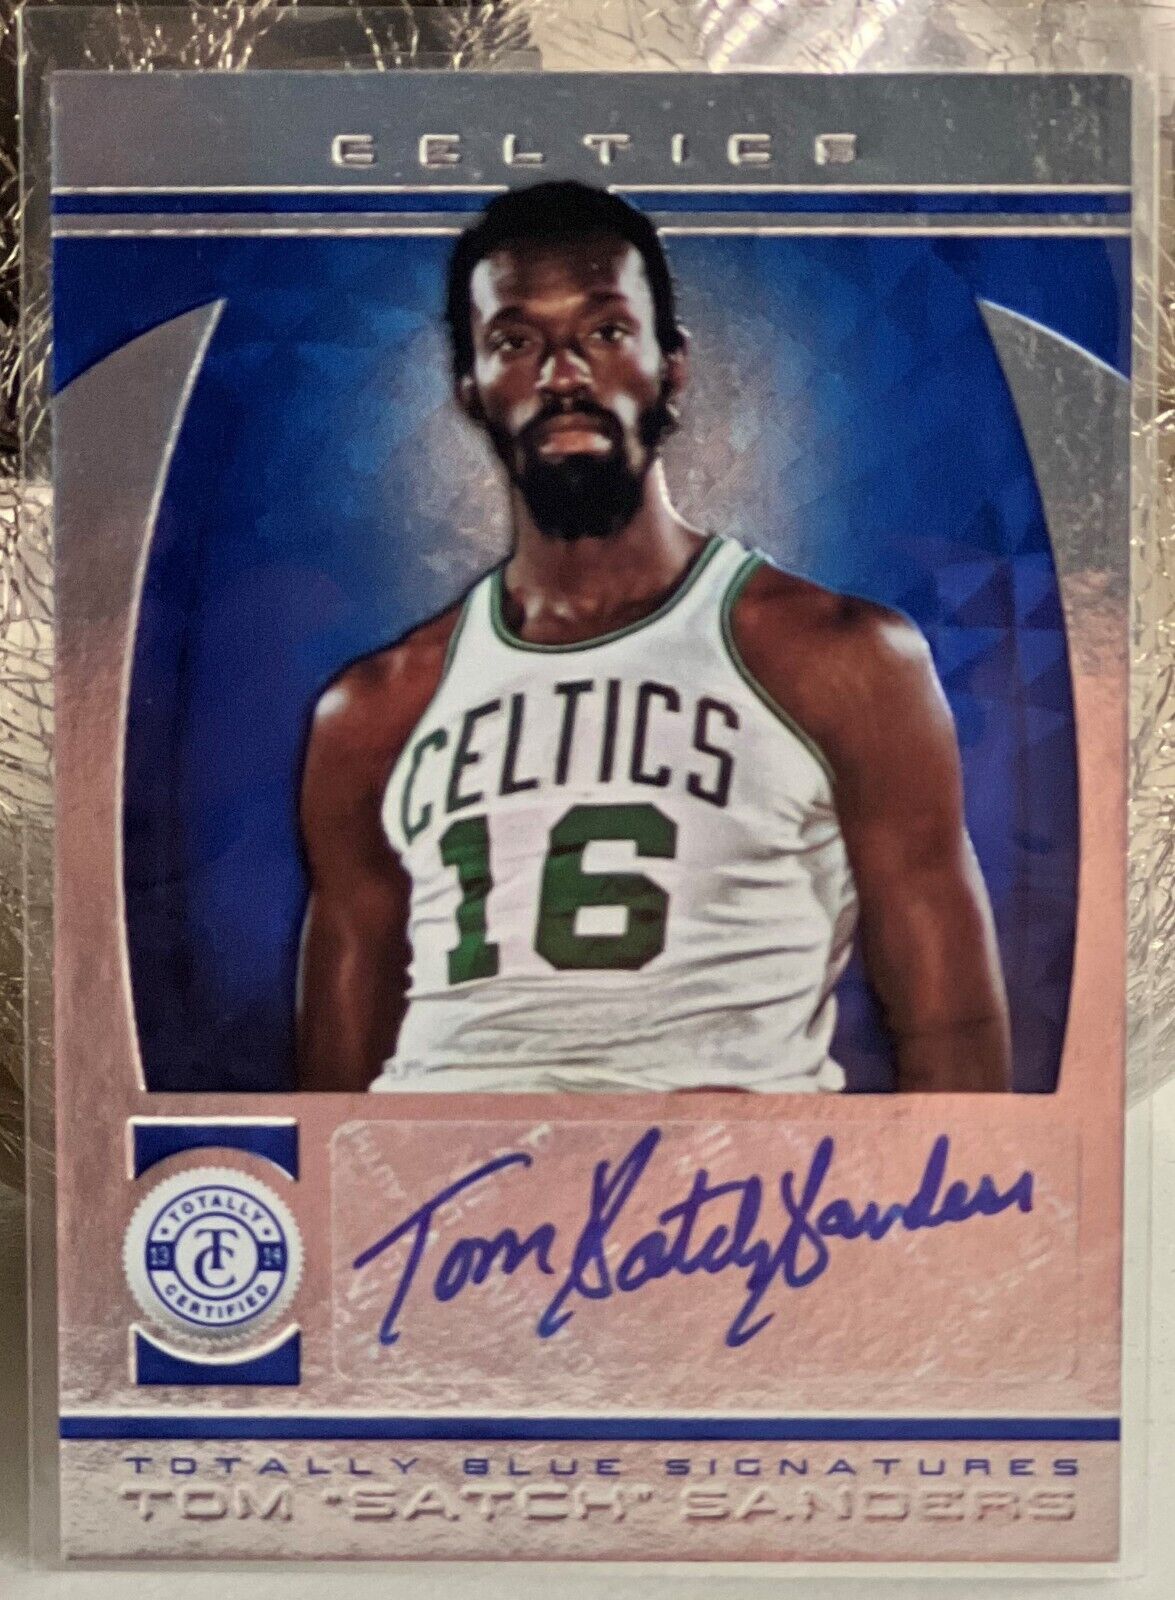 2013-14 Totally Certified Blue Signatures Car /5 - Tom \